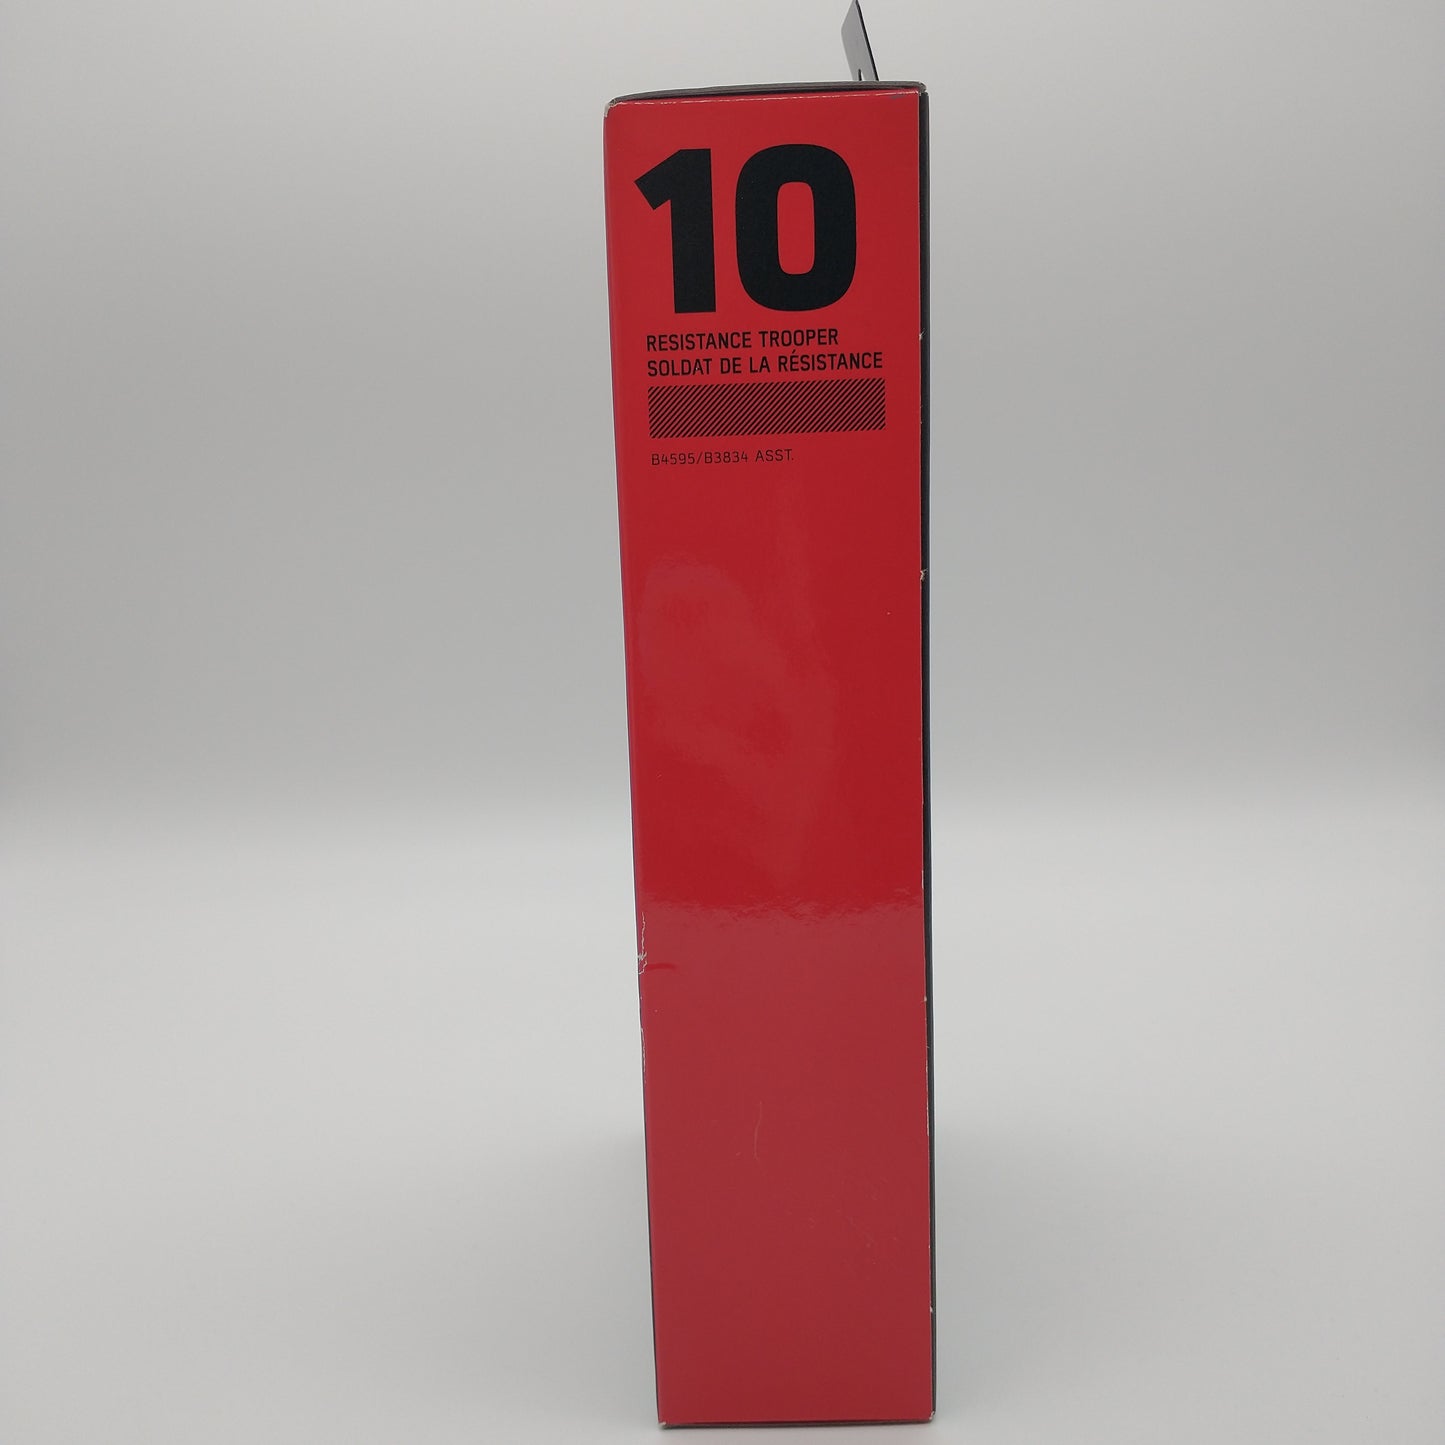 The side of the box. It's red with the numbers '10' written in bold black letters at the top.